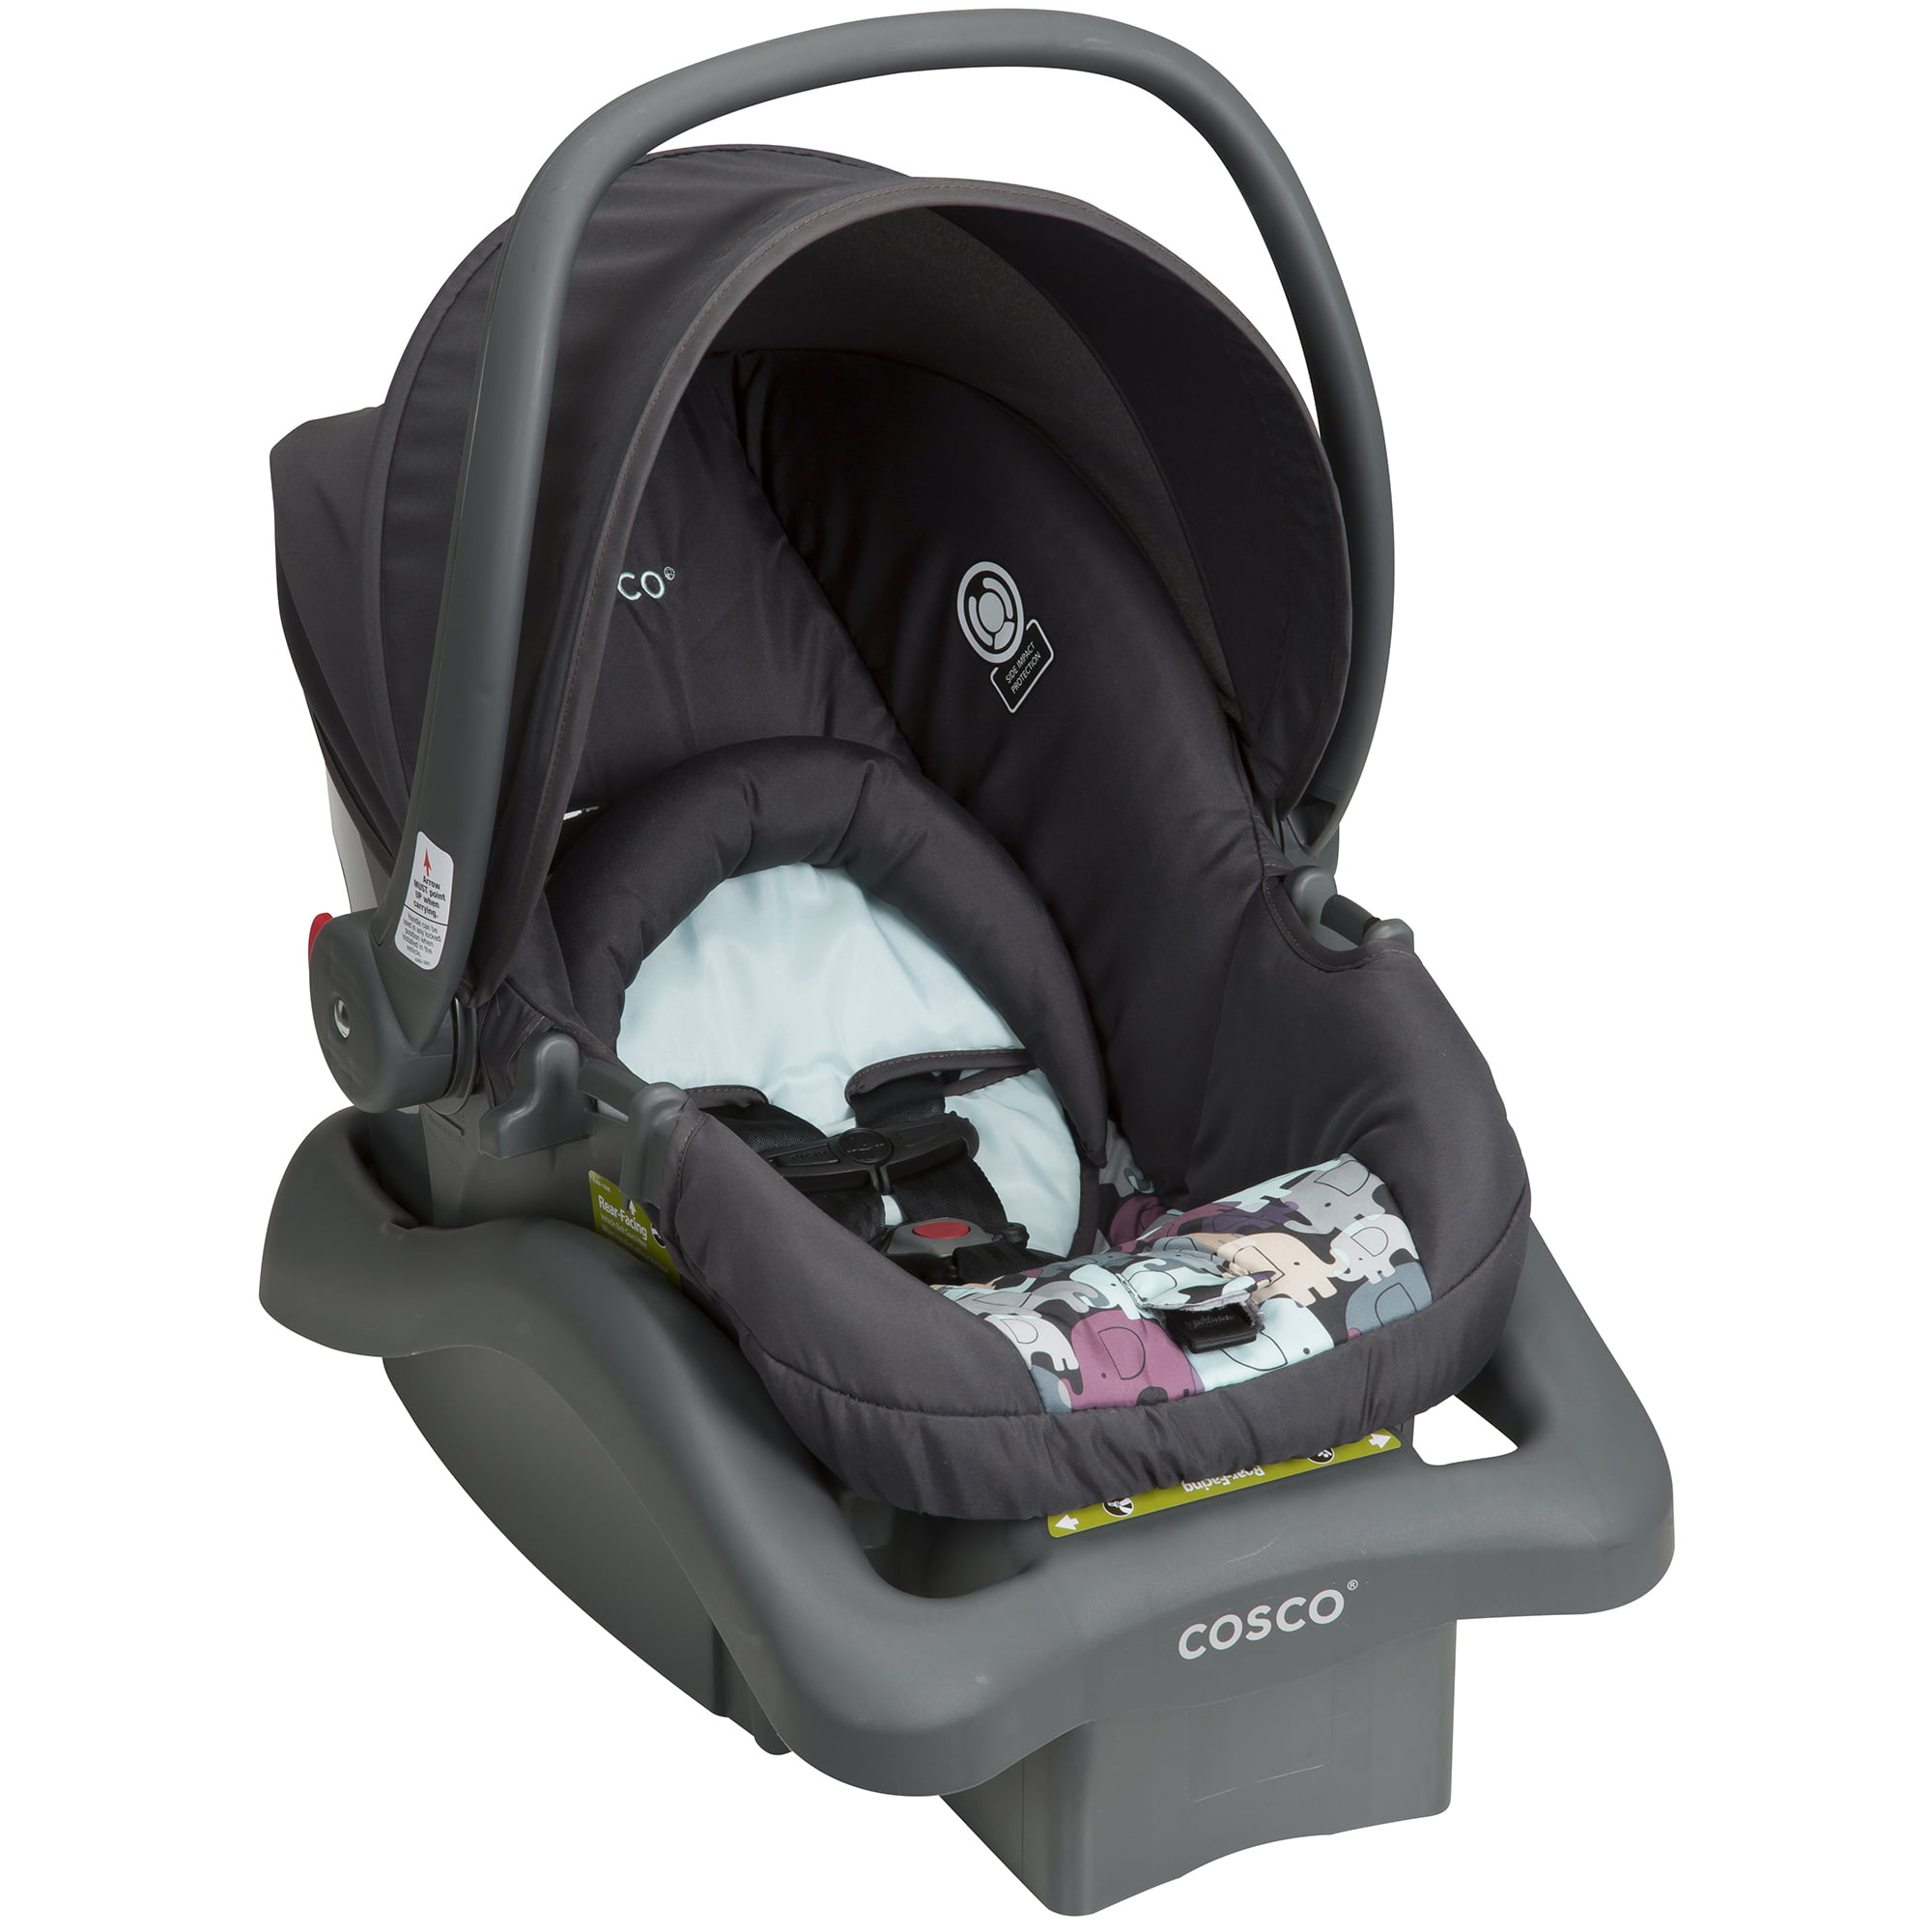 elephant themed car seat and stroller